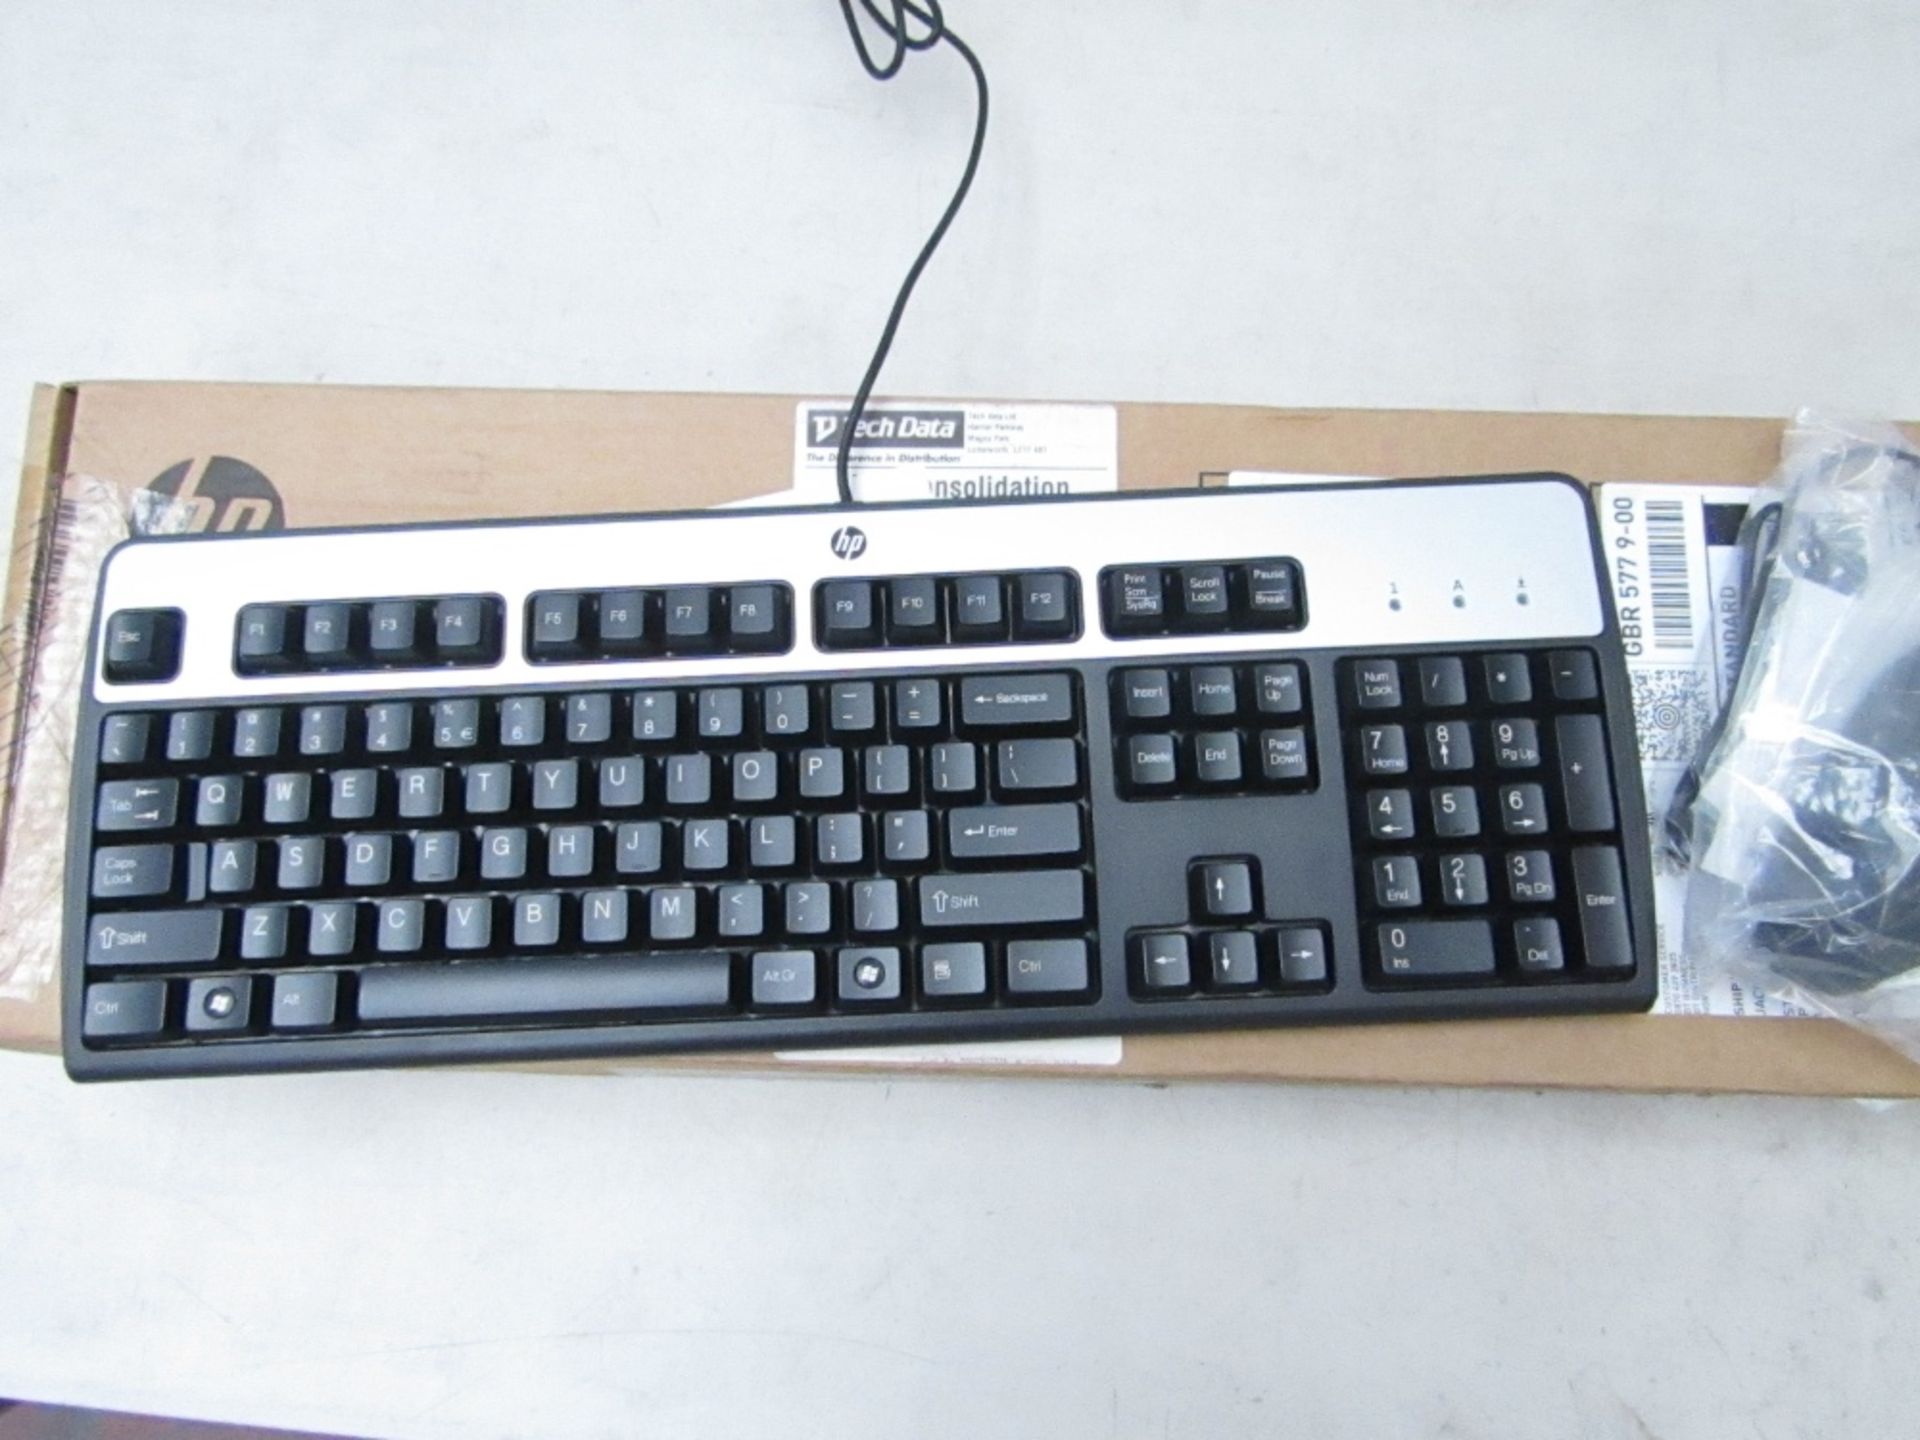 HP USB keyboard and mouse set, new and boxed